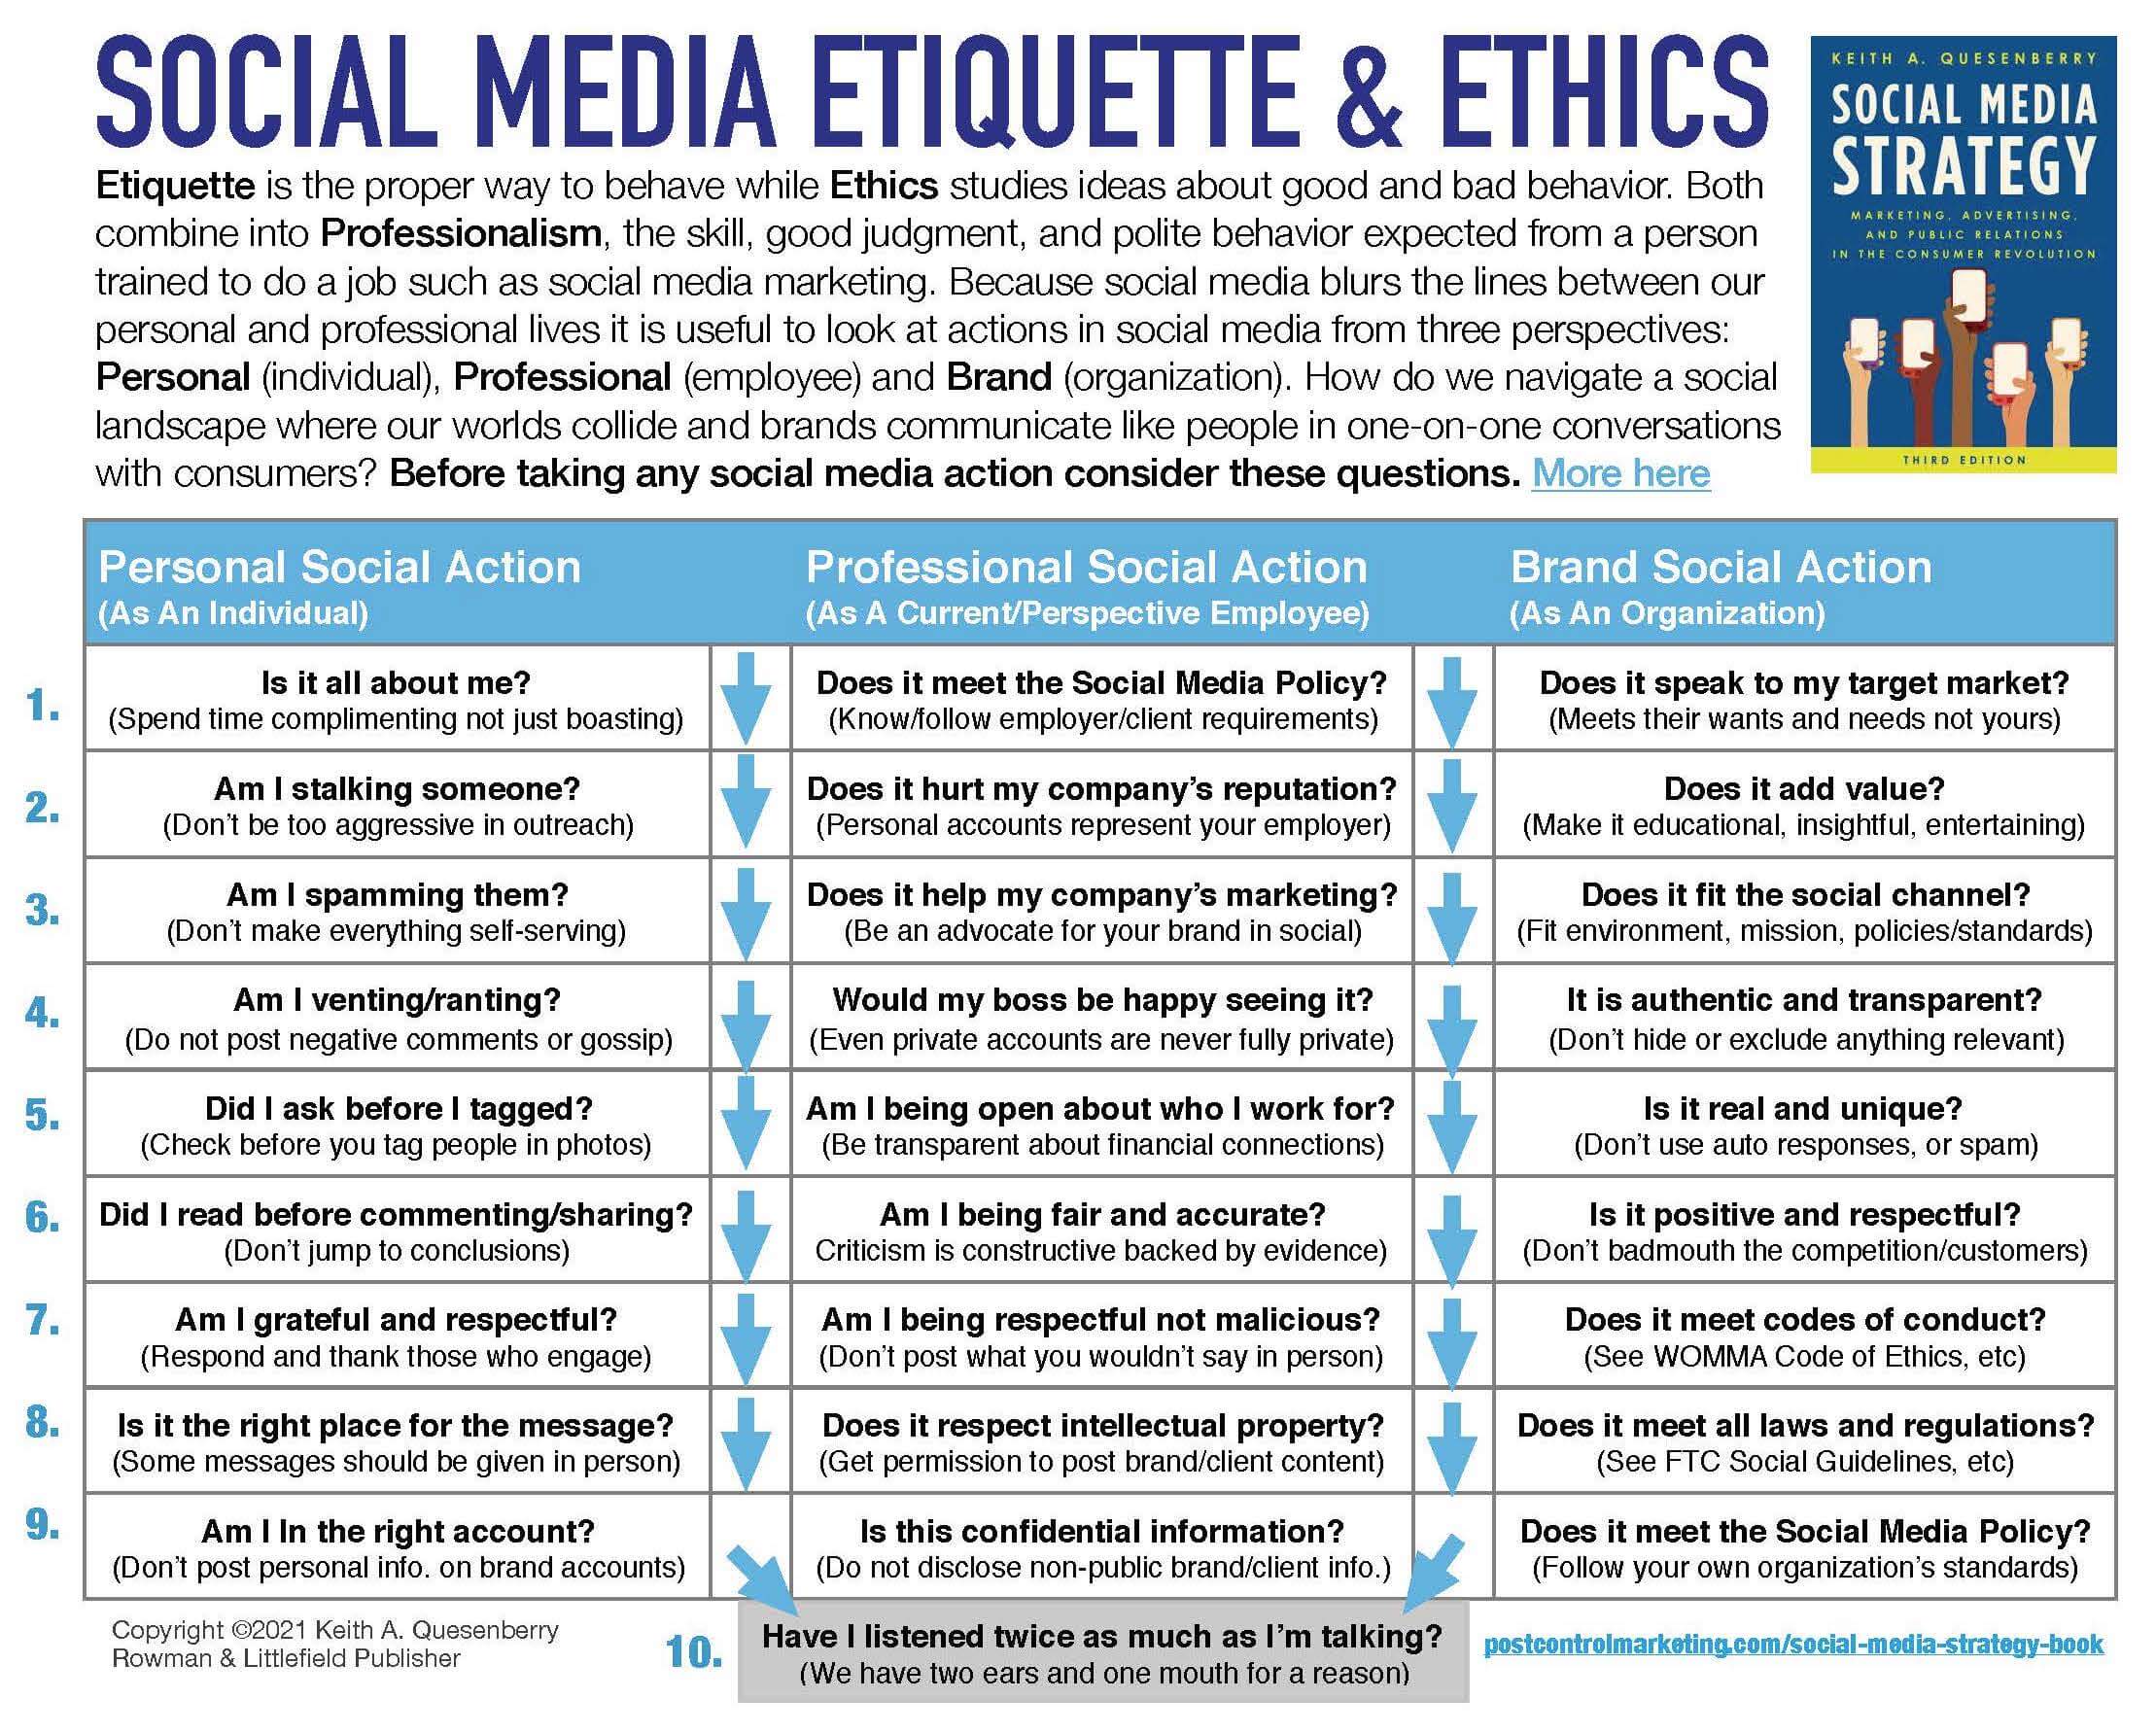 What Is Social Media Etiquette, And How Can It Help Improve Online Behavior And Netiquette? Promoting Positive Digital Citizenship